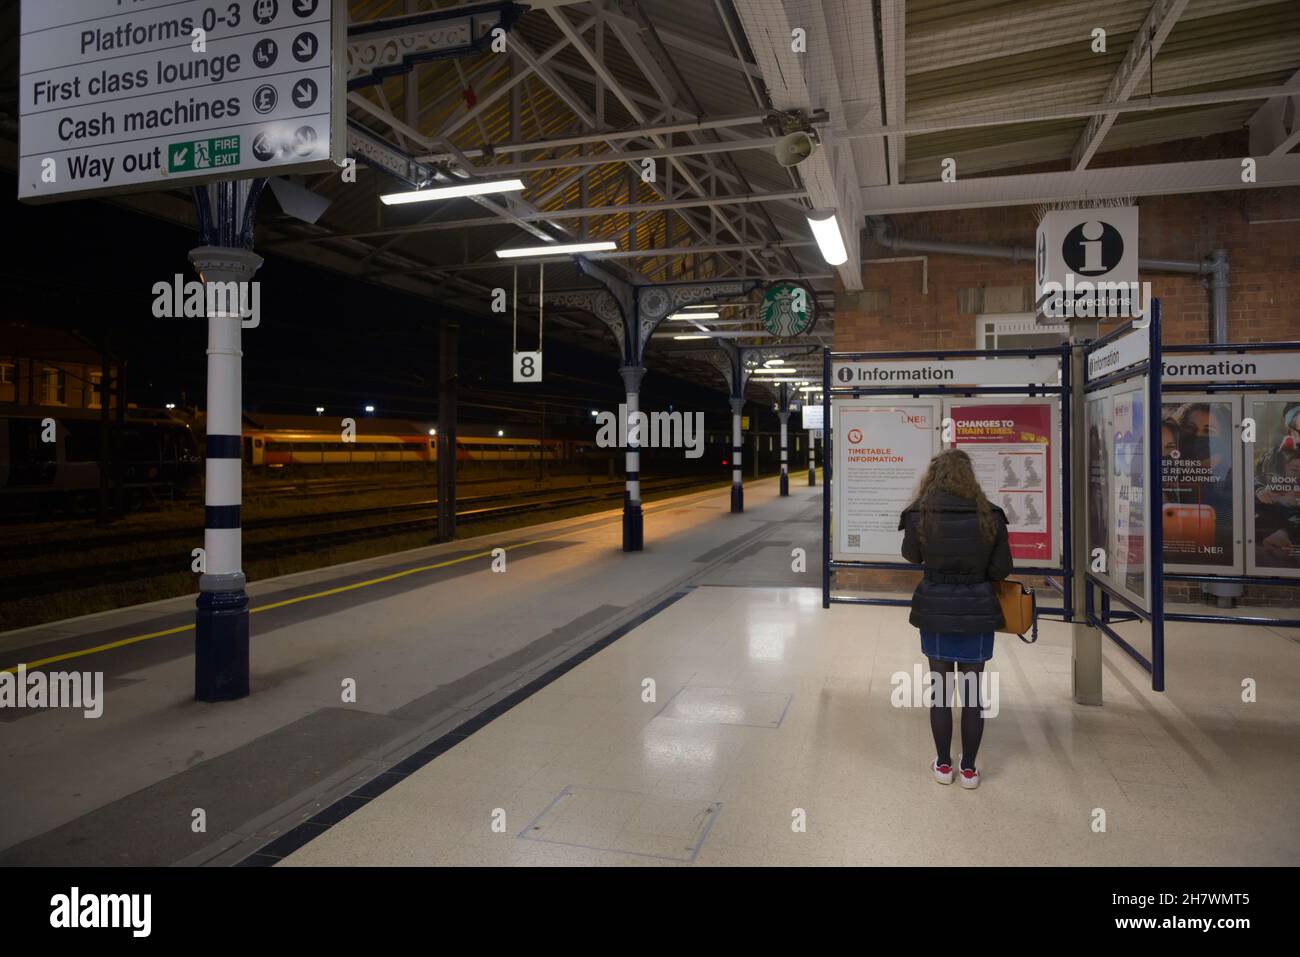 Doncaster, United Kingdom, 22nd May, 2021: Wide angle image of doncaster train station platform number 8 at night. Woman reads information point. Stock Photo